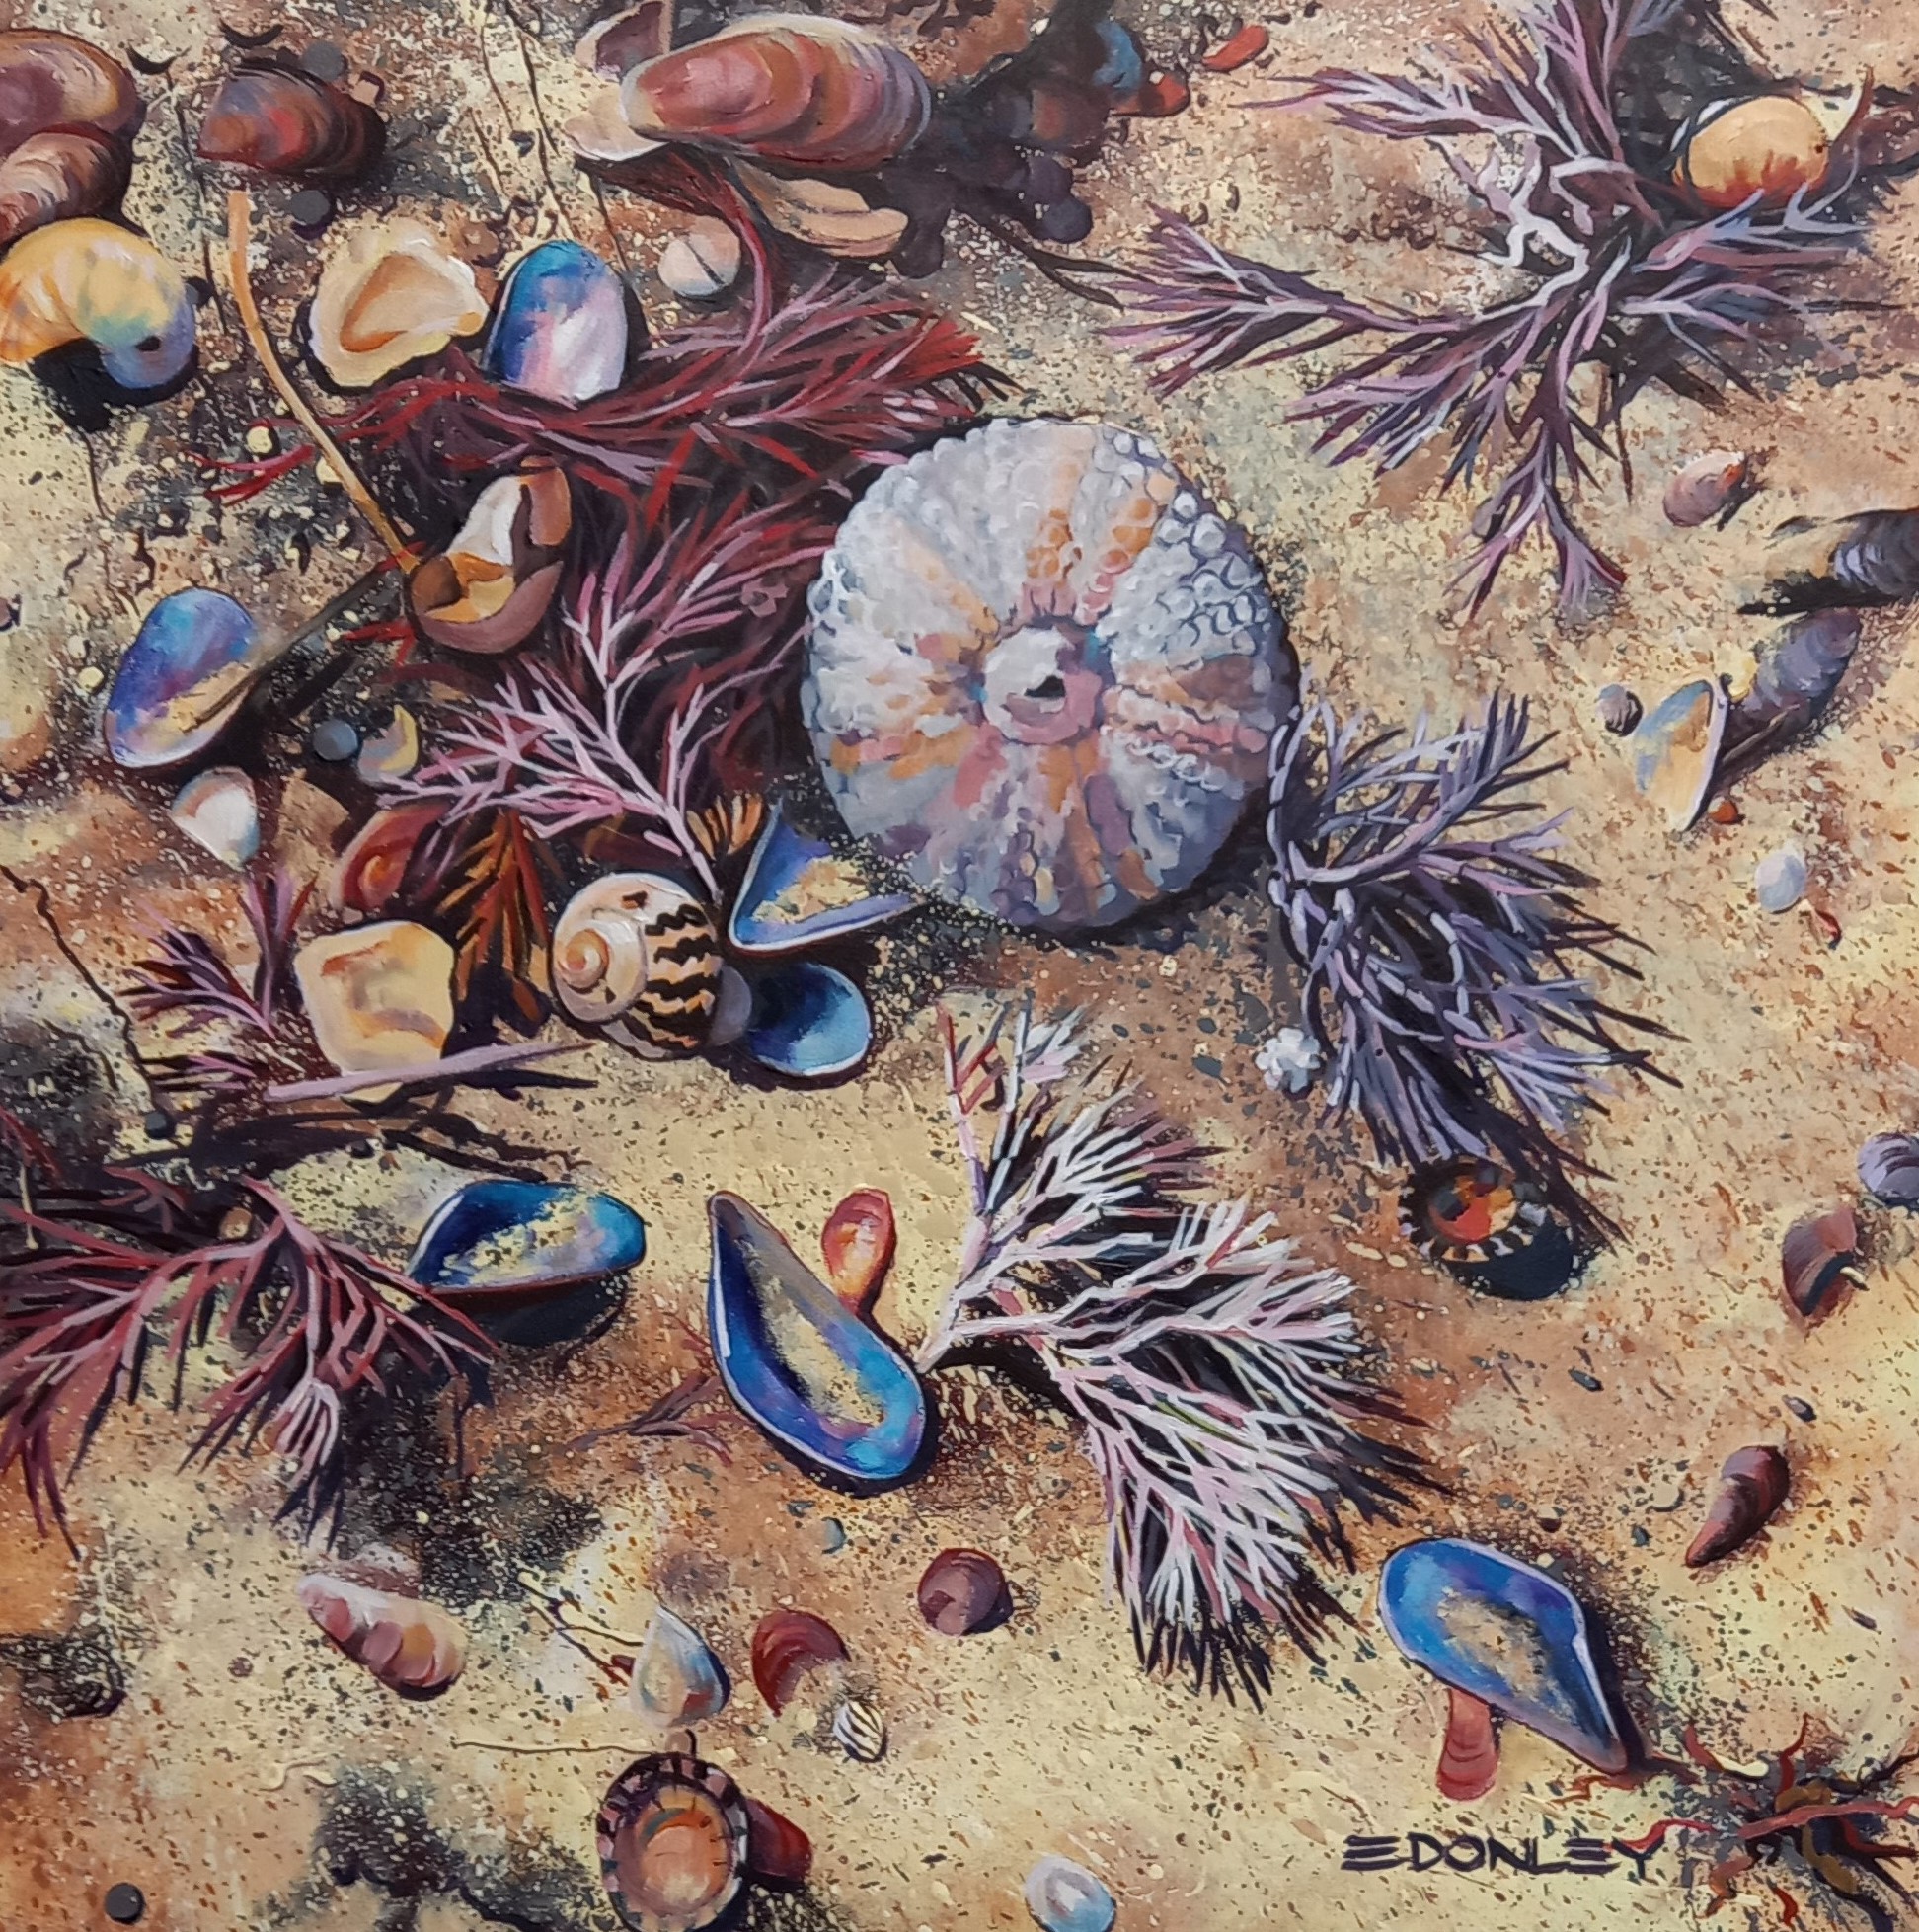 A painting of the seashore featuring shells, seaweed and a sea urchin.